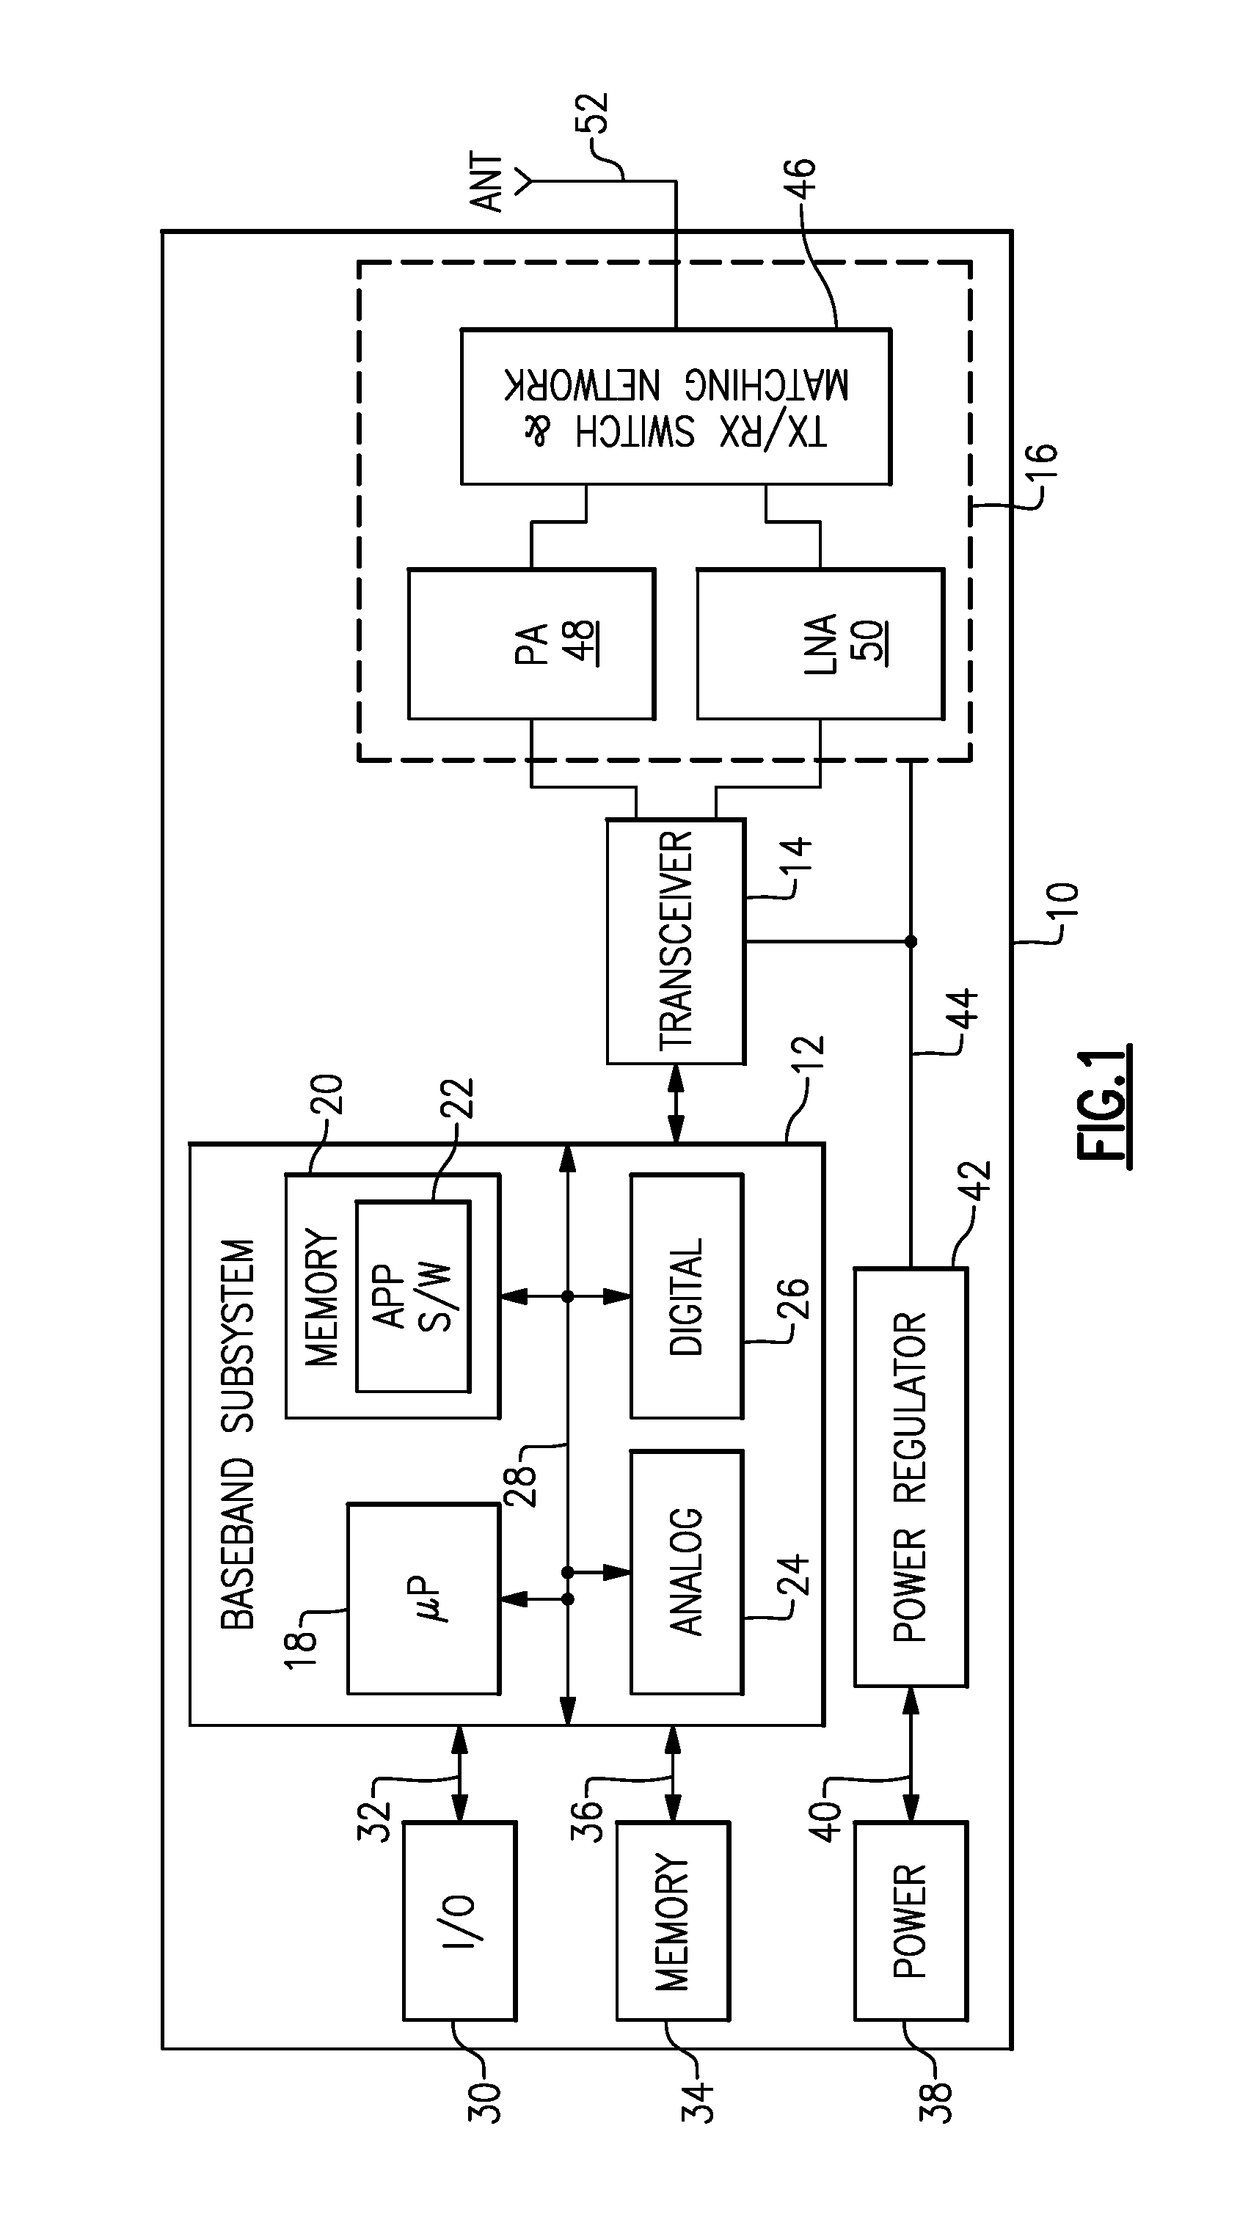 Wide dynamic range broadband current mode linear detector circuits for high power radio frequency power amplifier